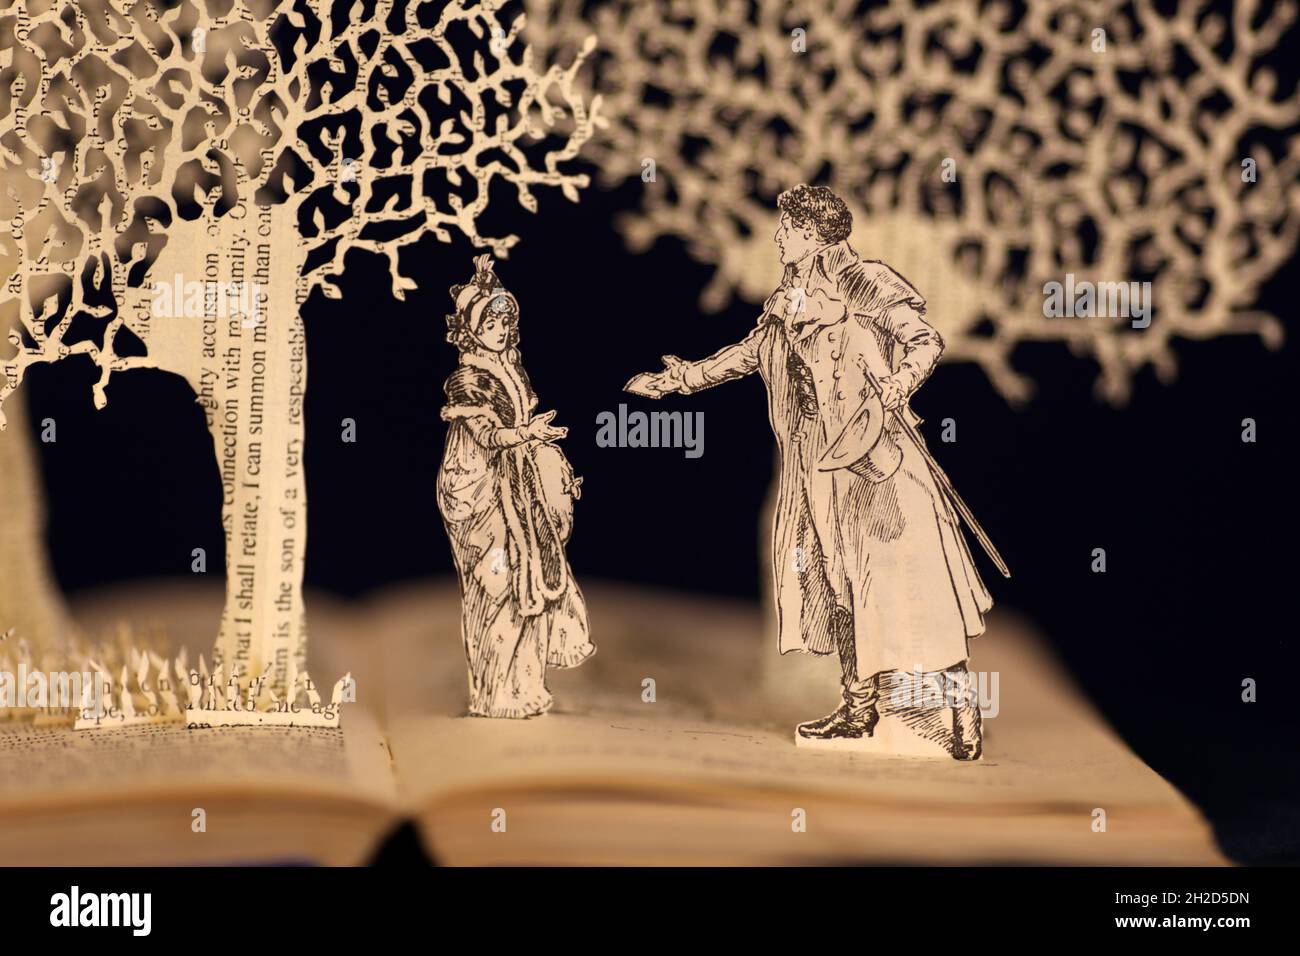 Book sculpture made from hand cut pages of Pride and Prejudice by Jane Austen incorporating the original antique book illustration. Stock Photo